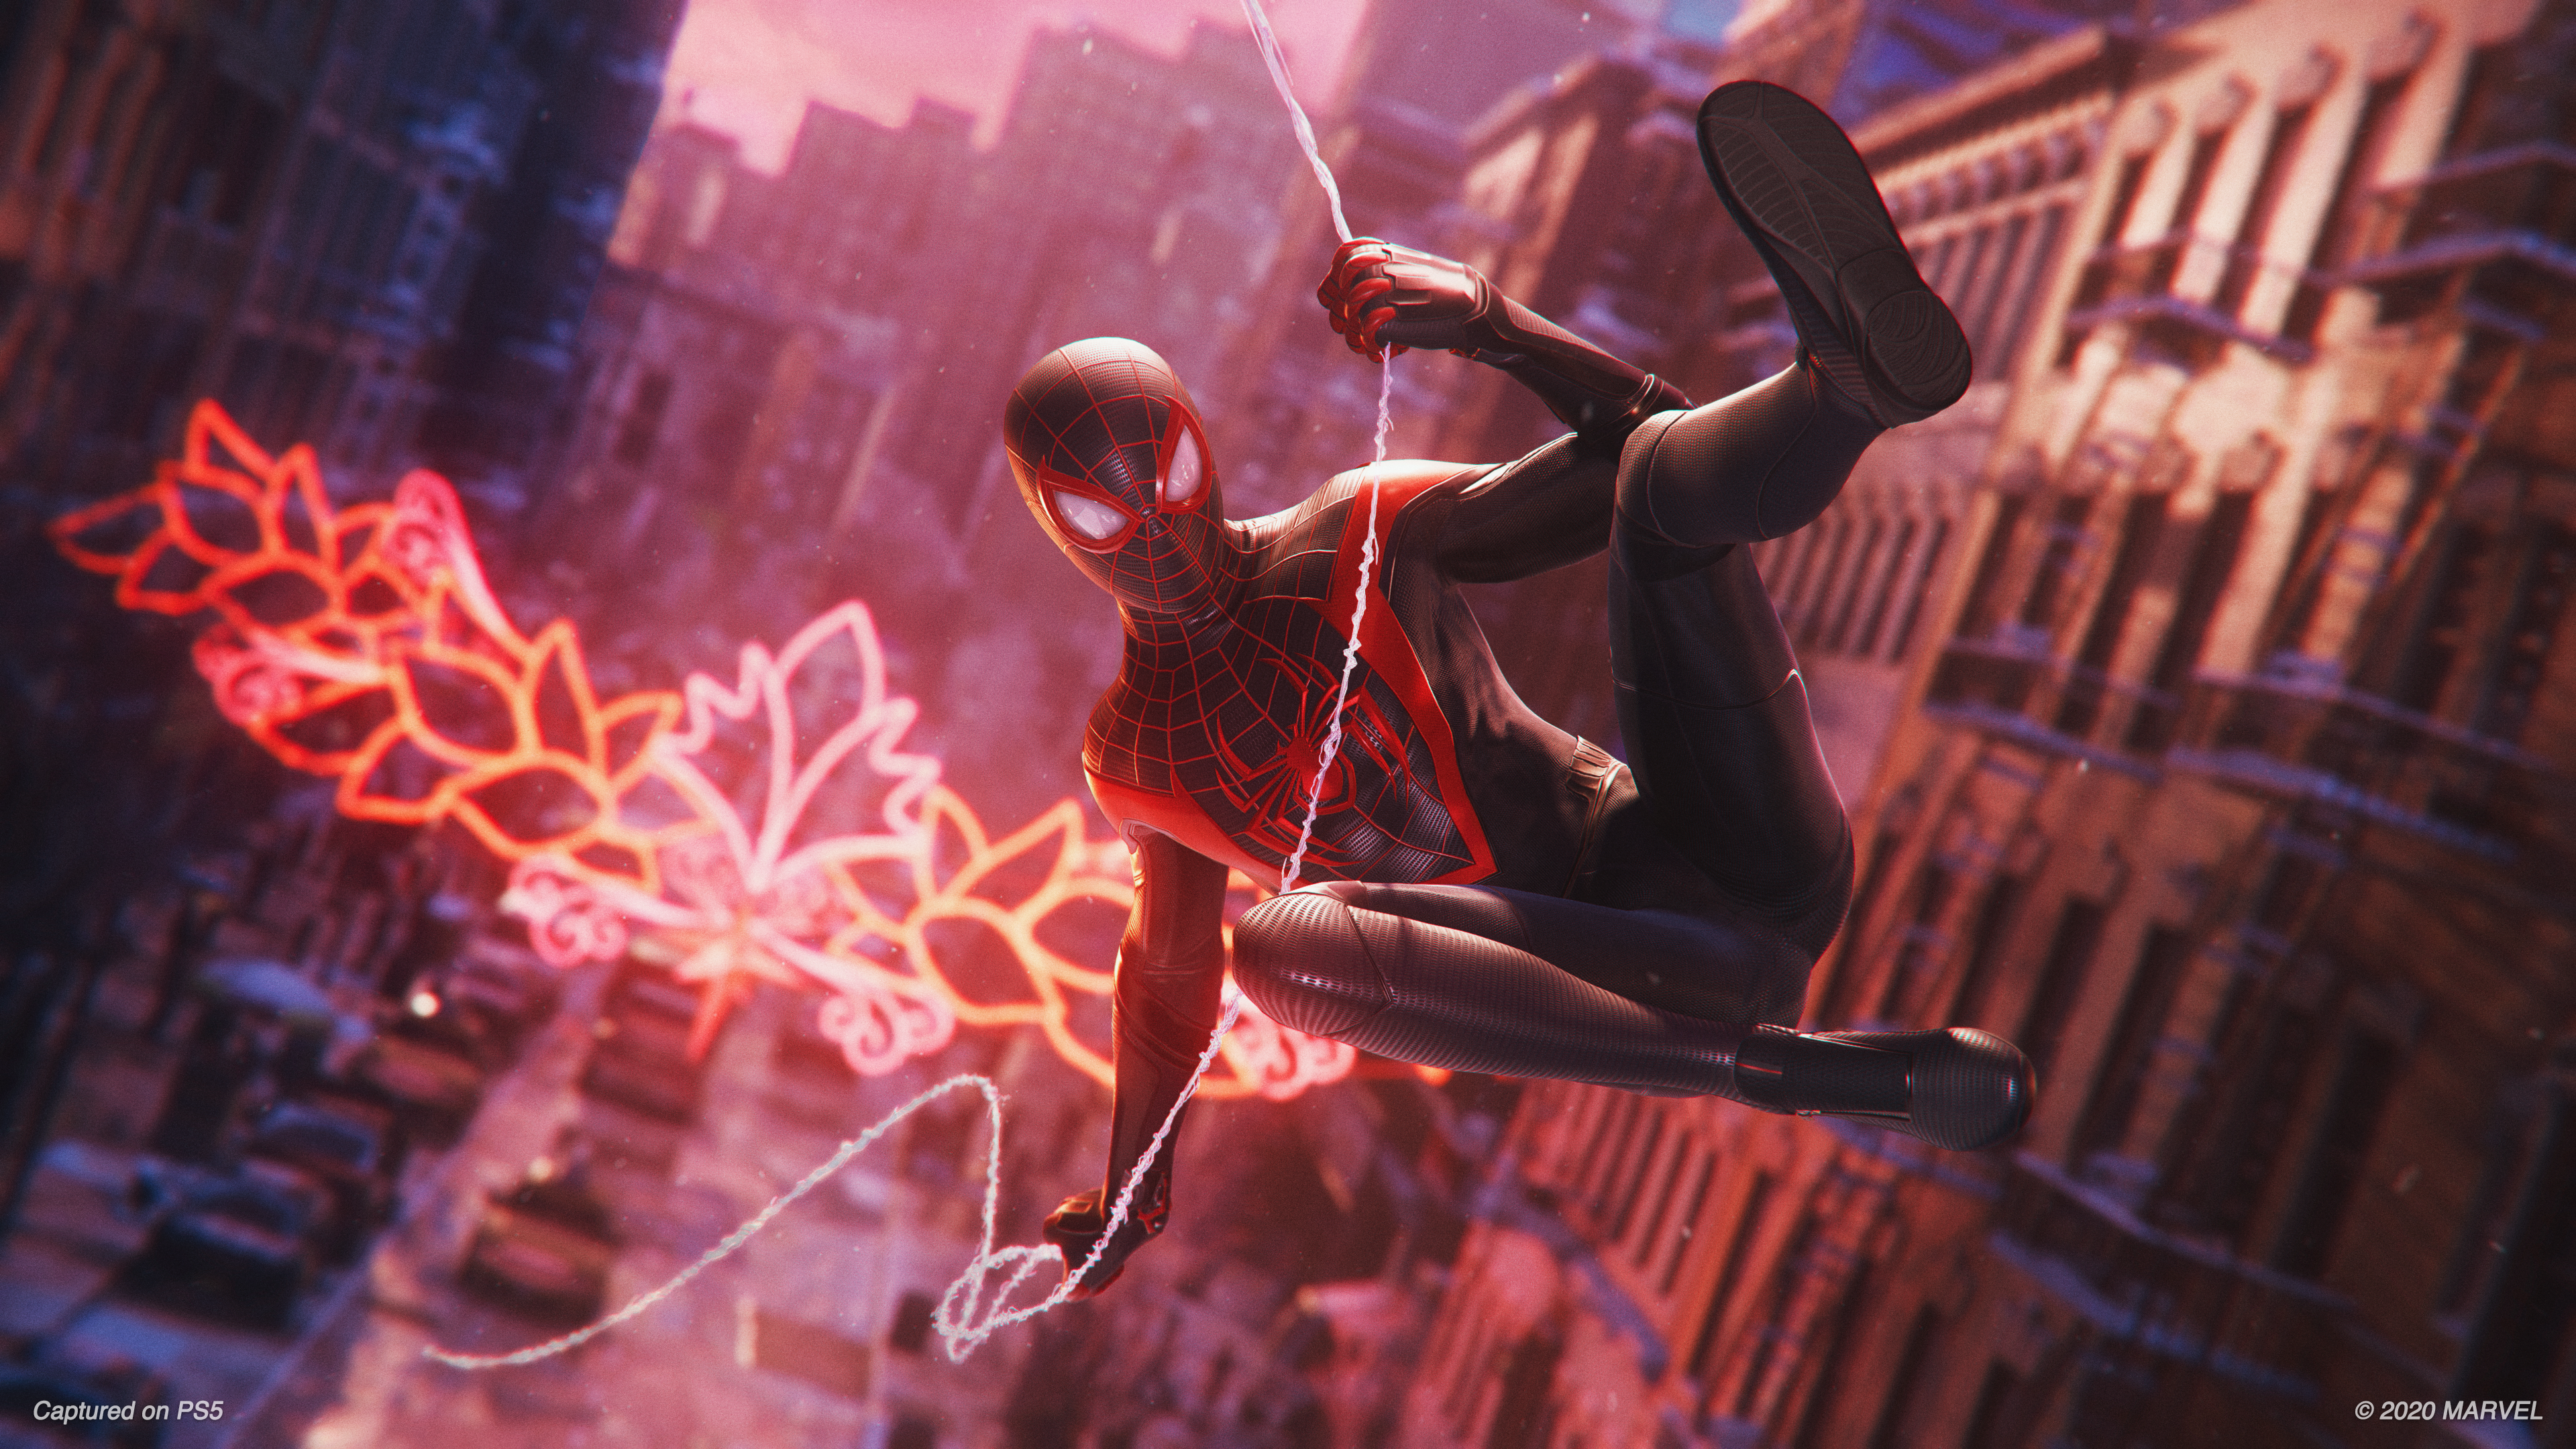 Spider-Man swinging from a web